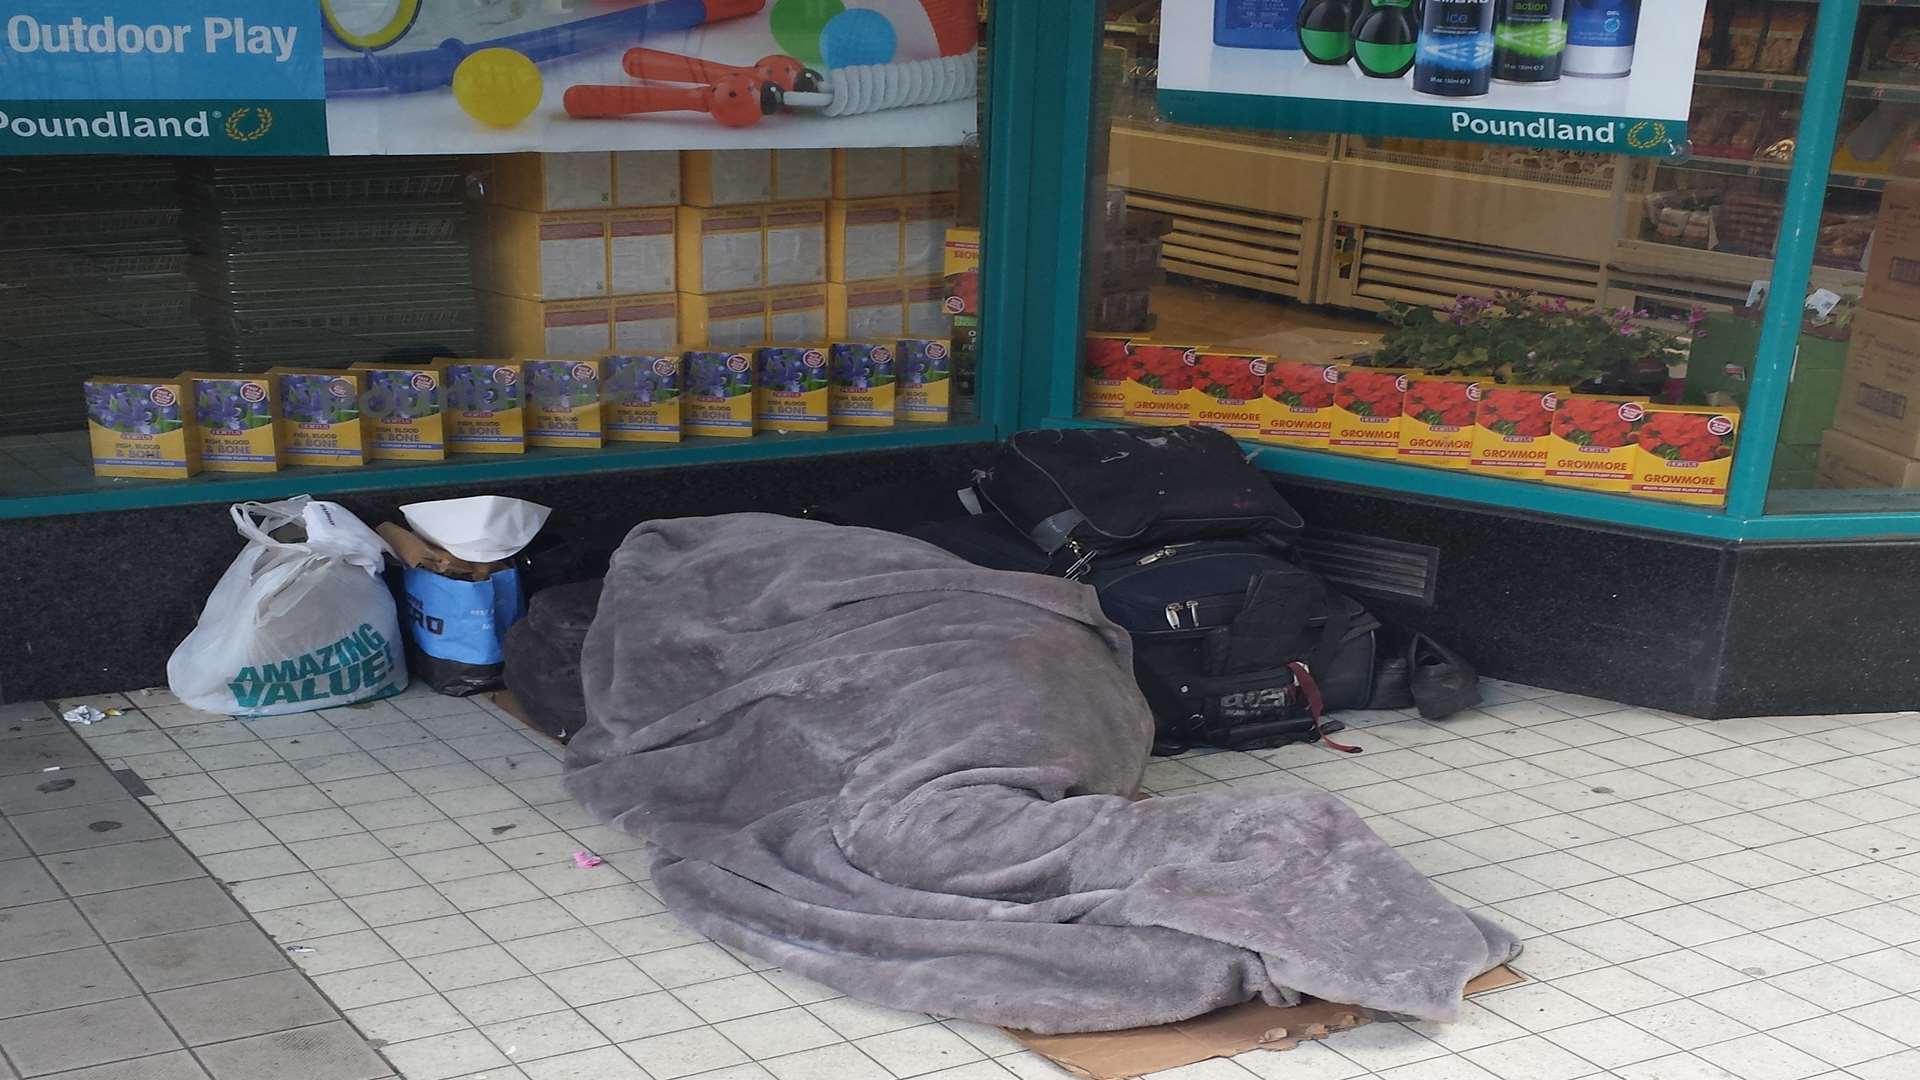 A homeless person sleeping in a shop doorway. Stock image